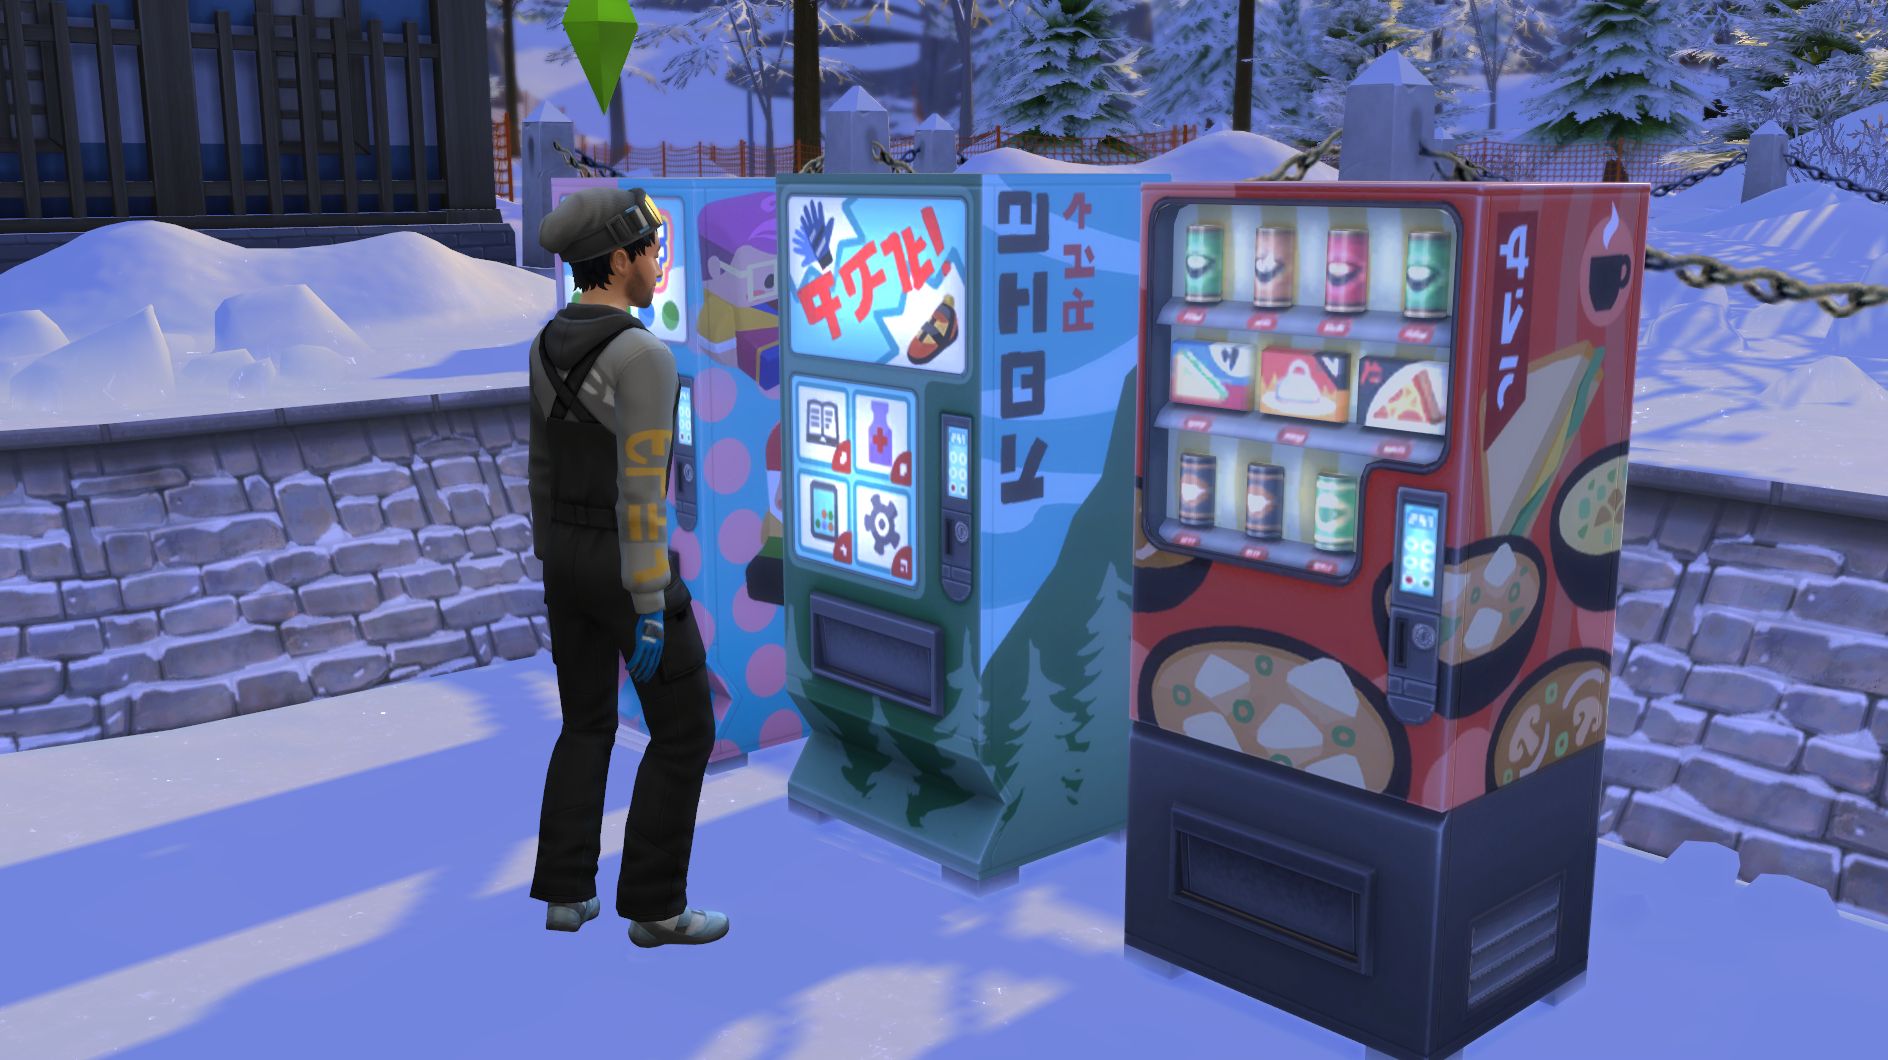 Where to buy Skis in The Sims 4 Snowy Escape